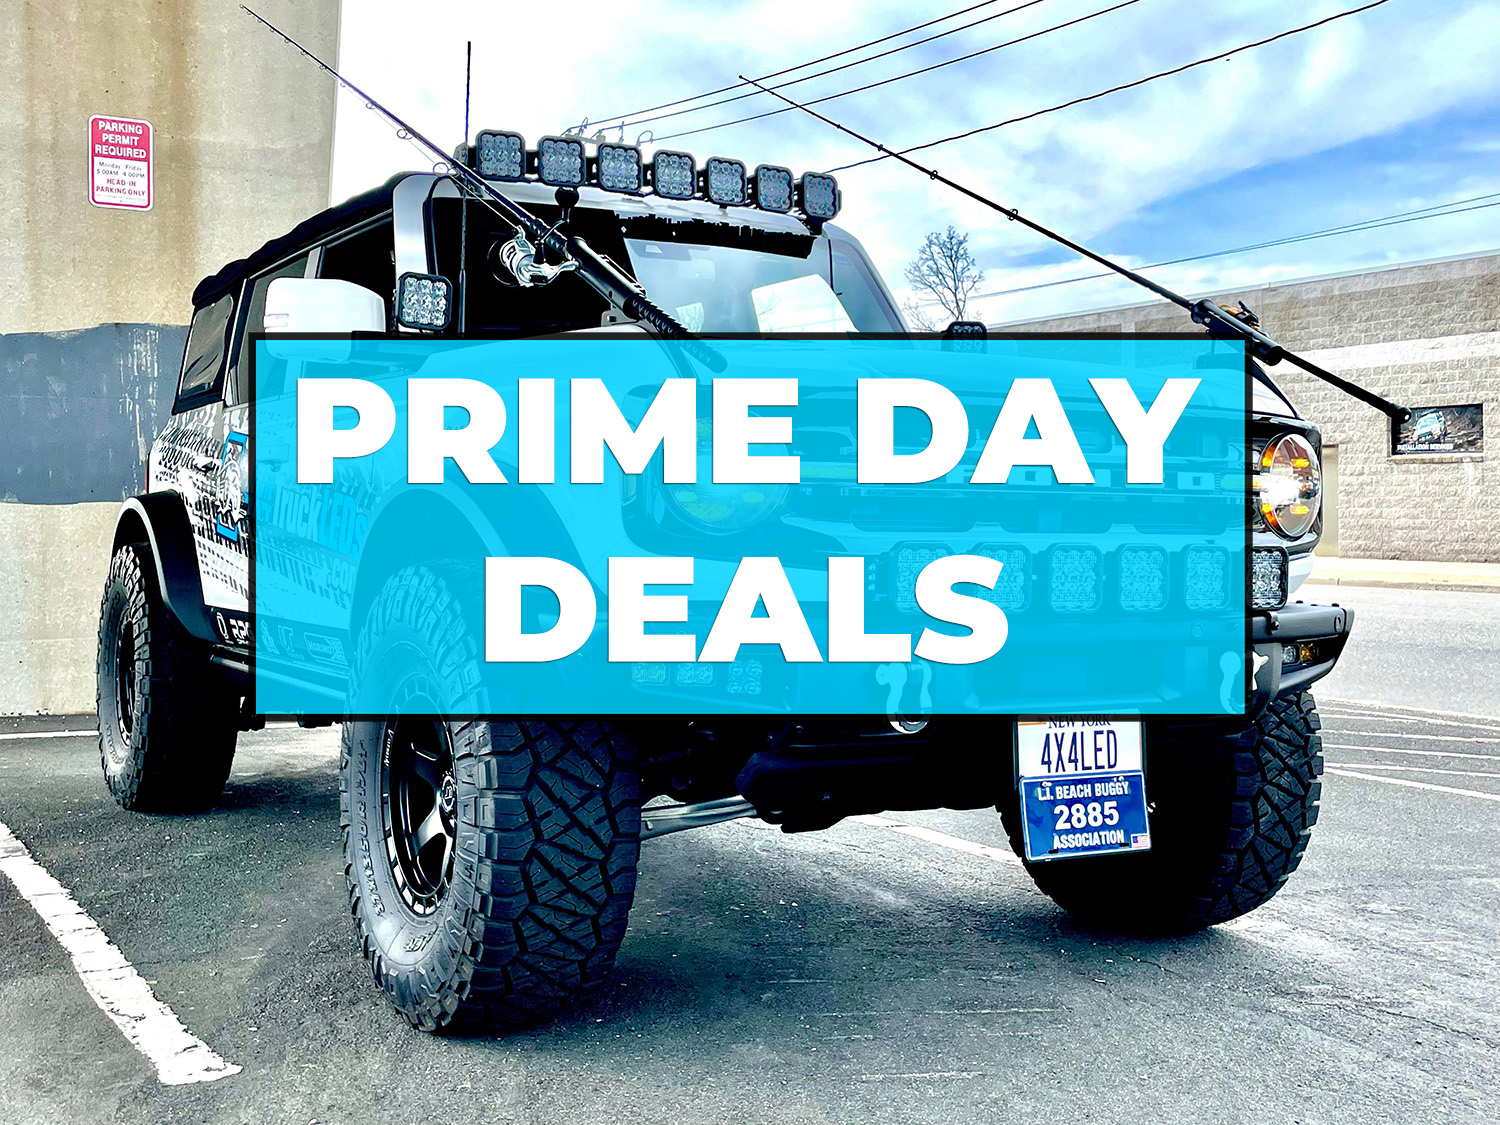 Ford Bronco PRIME DAY SALES | 2 Day Sales Event at 4x4TruckLEDs.com (7/11 & 7/12) XB Prime Day